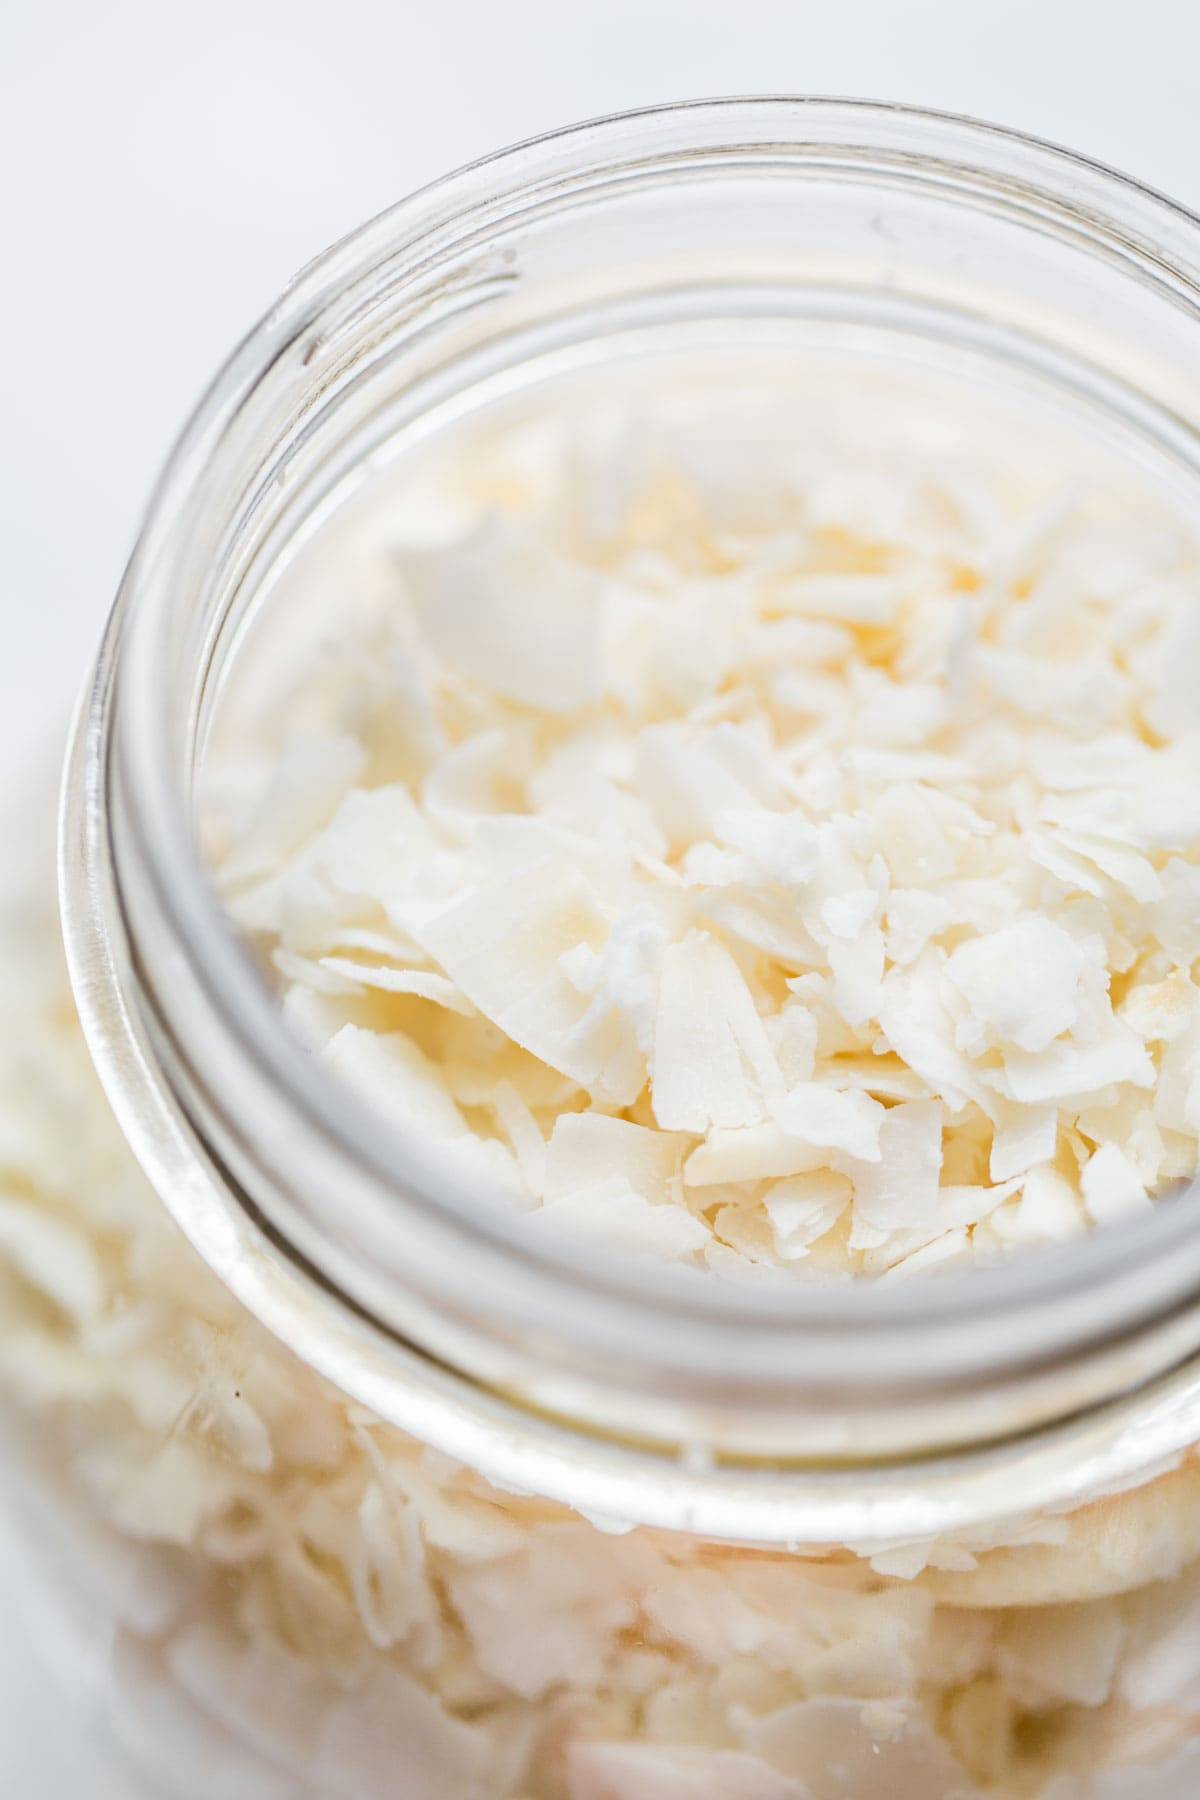 Coconut flakes in a jar.